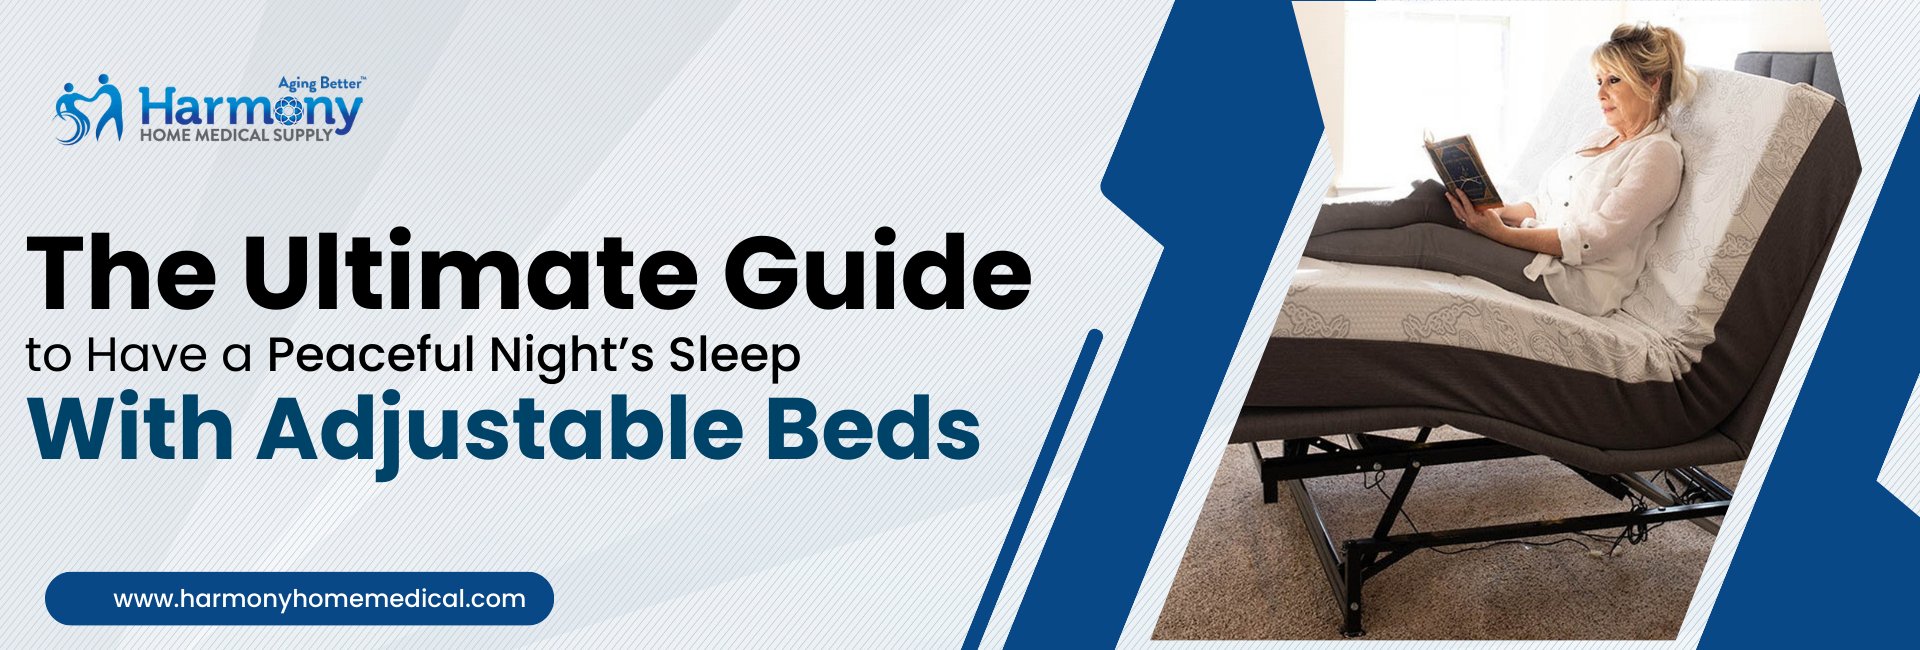 The Ultimate Guide to Peaceful Sleep with Adjustable Beds